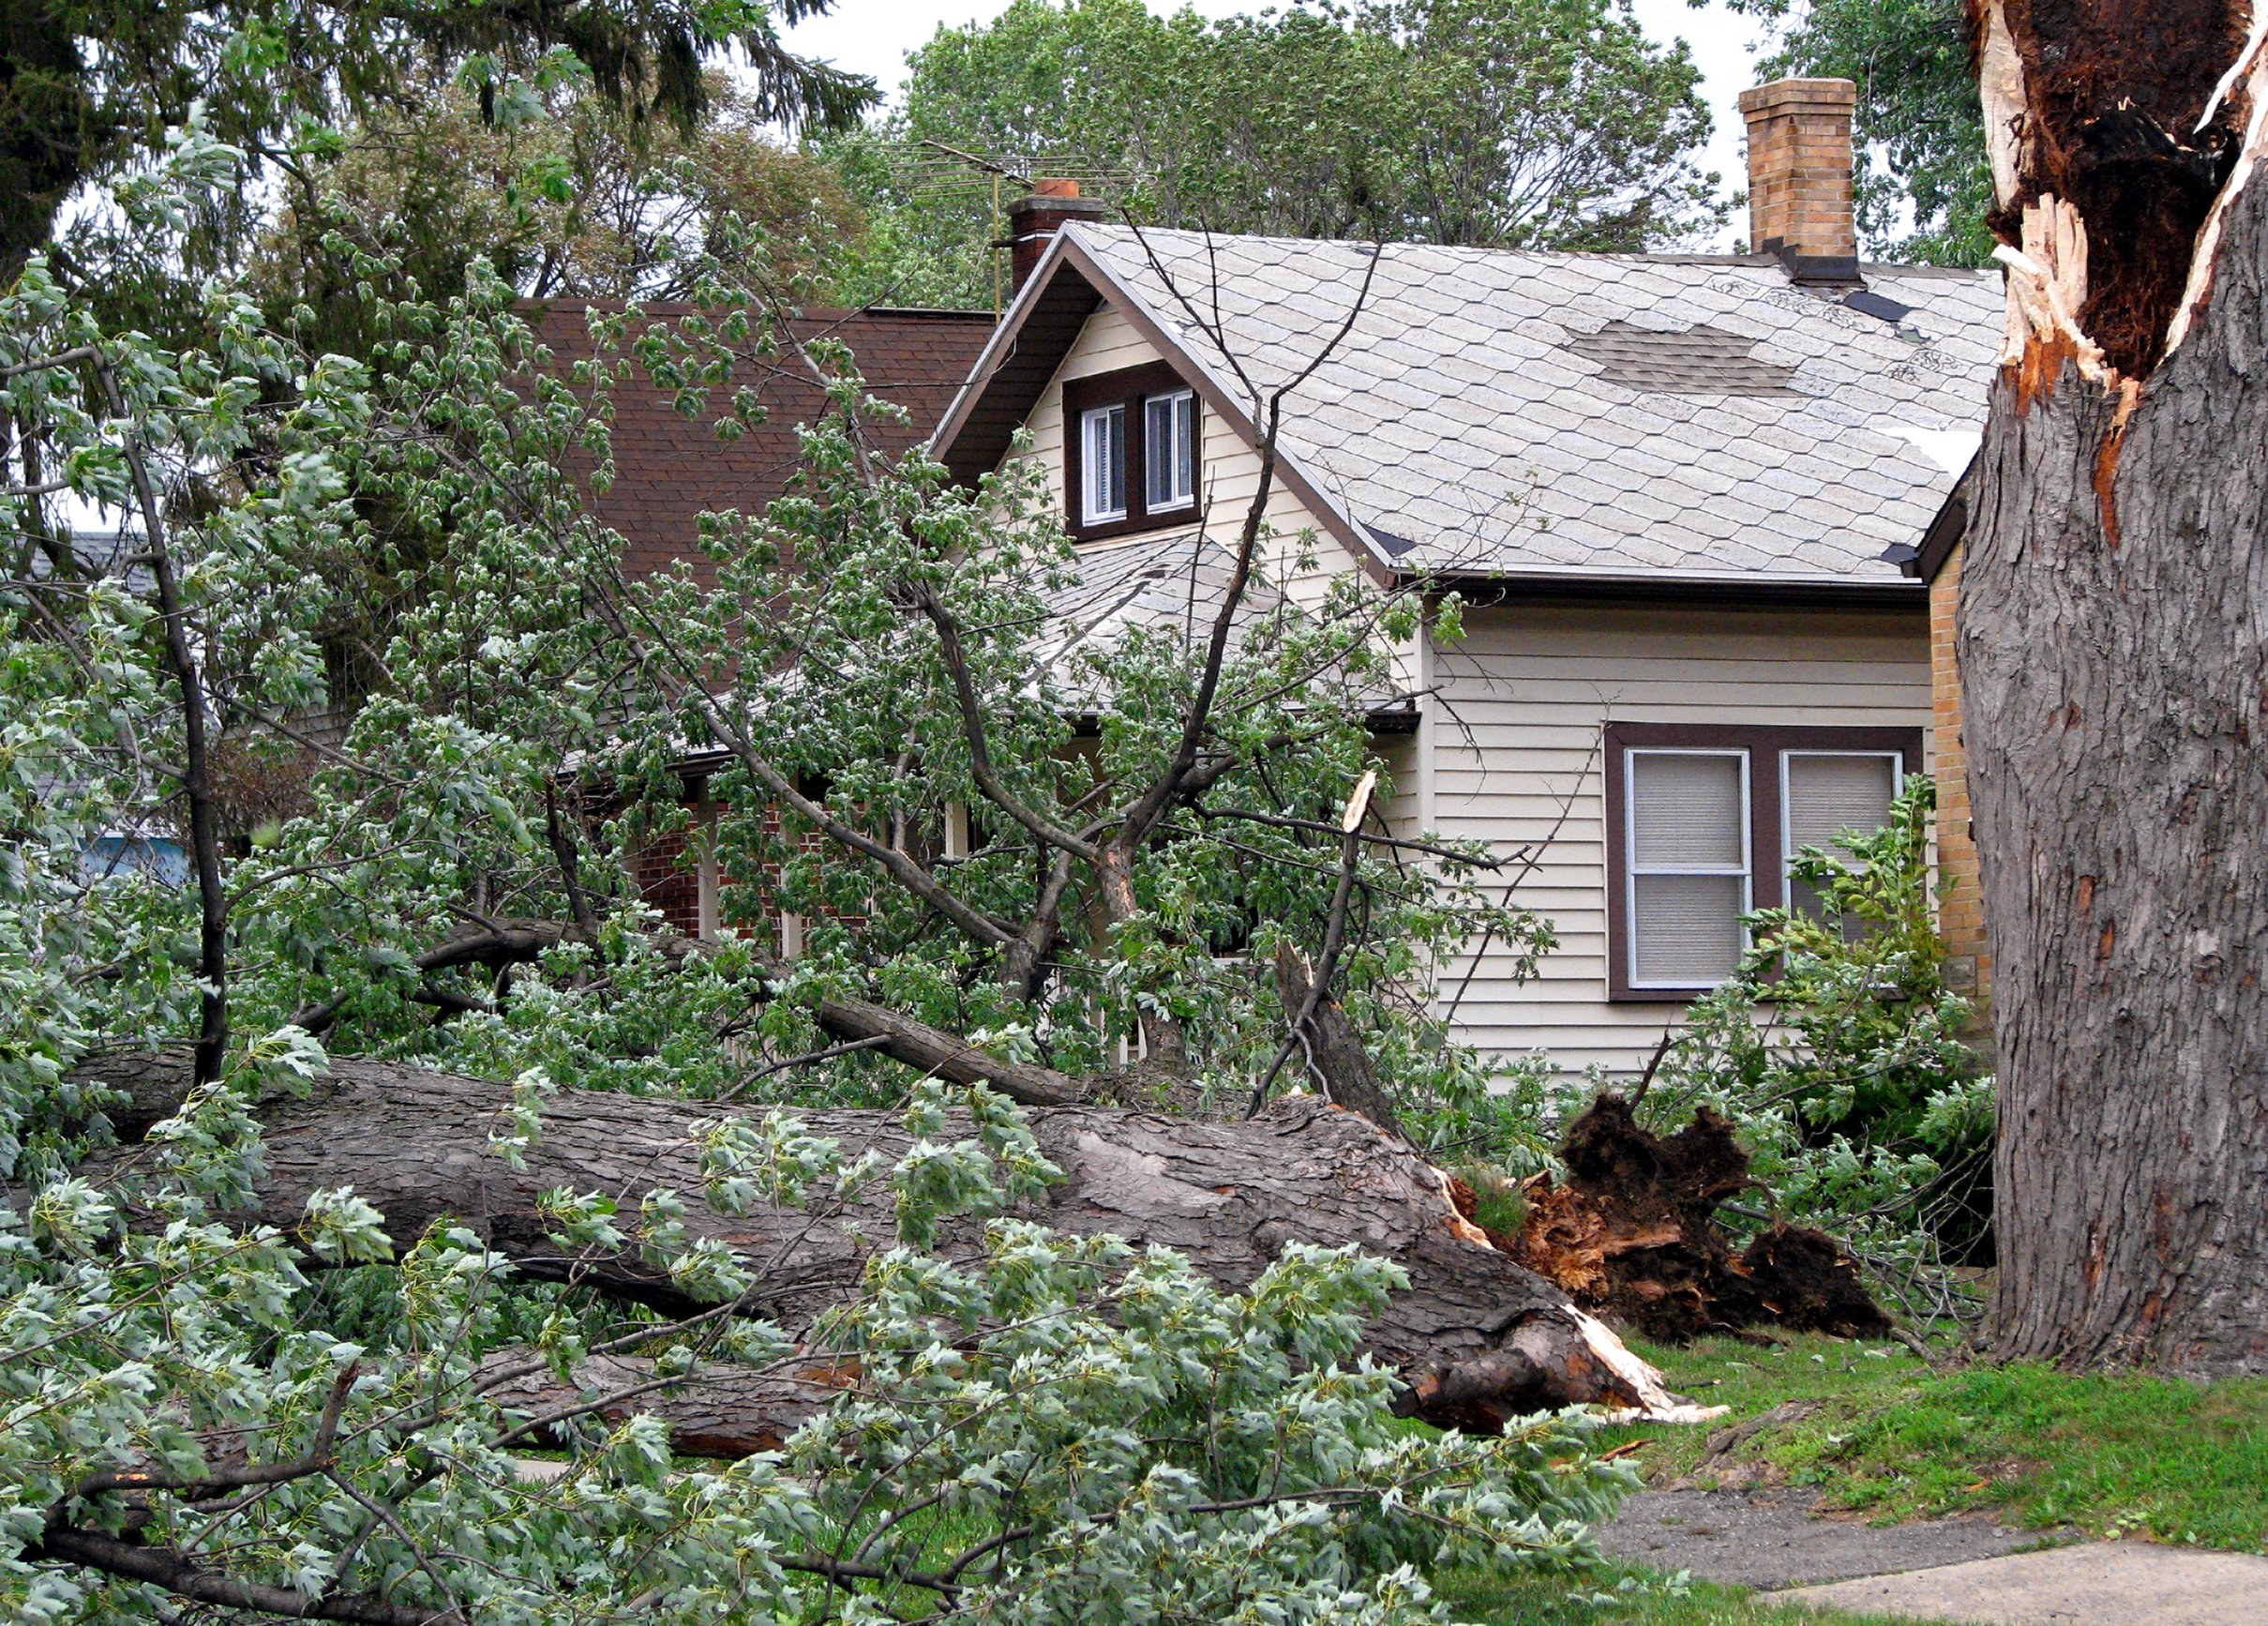 House damaged by strong winds in a storm